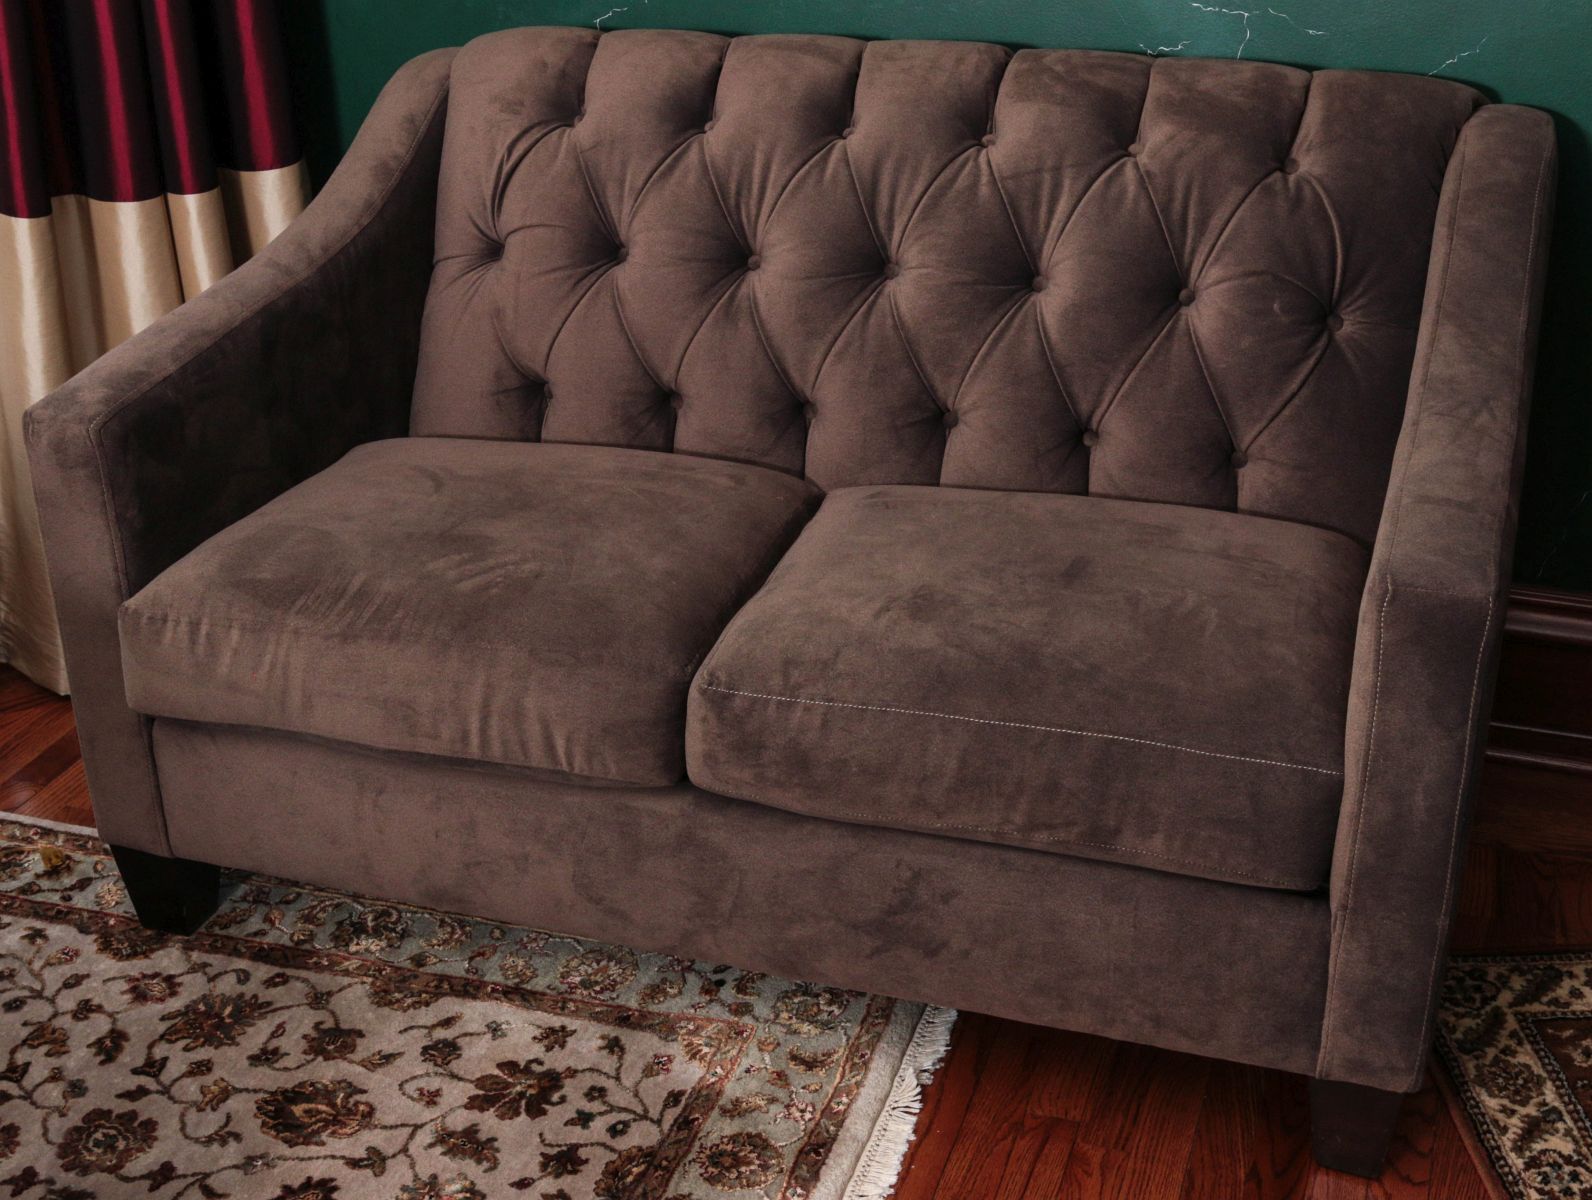 A TWO CUSHION LOVE SEAT WITH BUTTON TUCK BACK